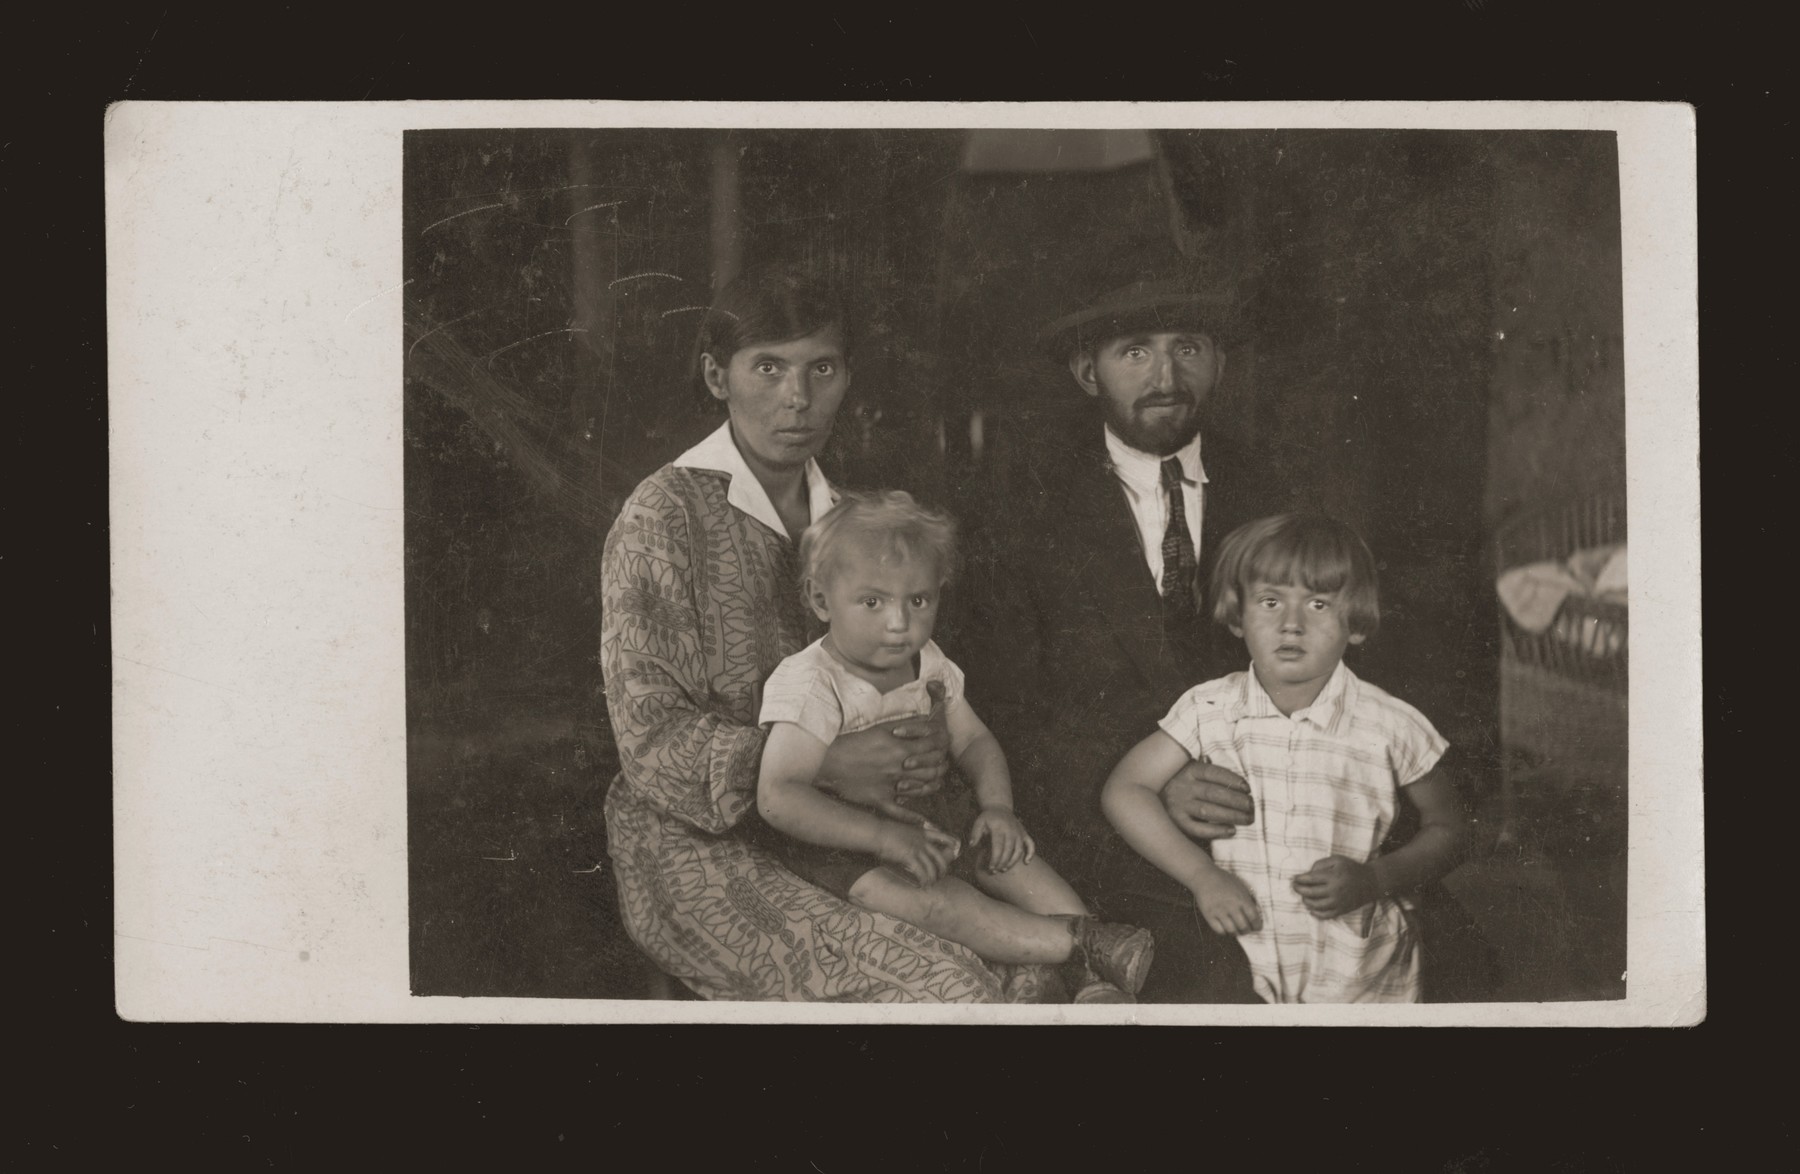 Portrait of a Jewish family [probably members of the Feder or Malach family].